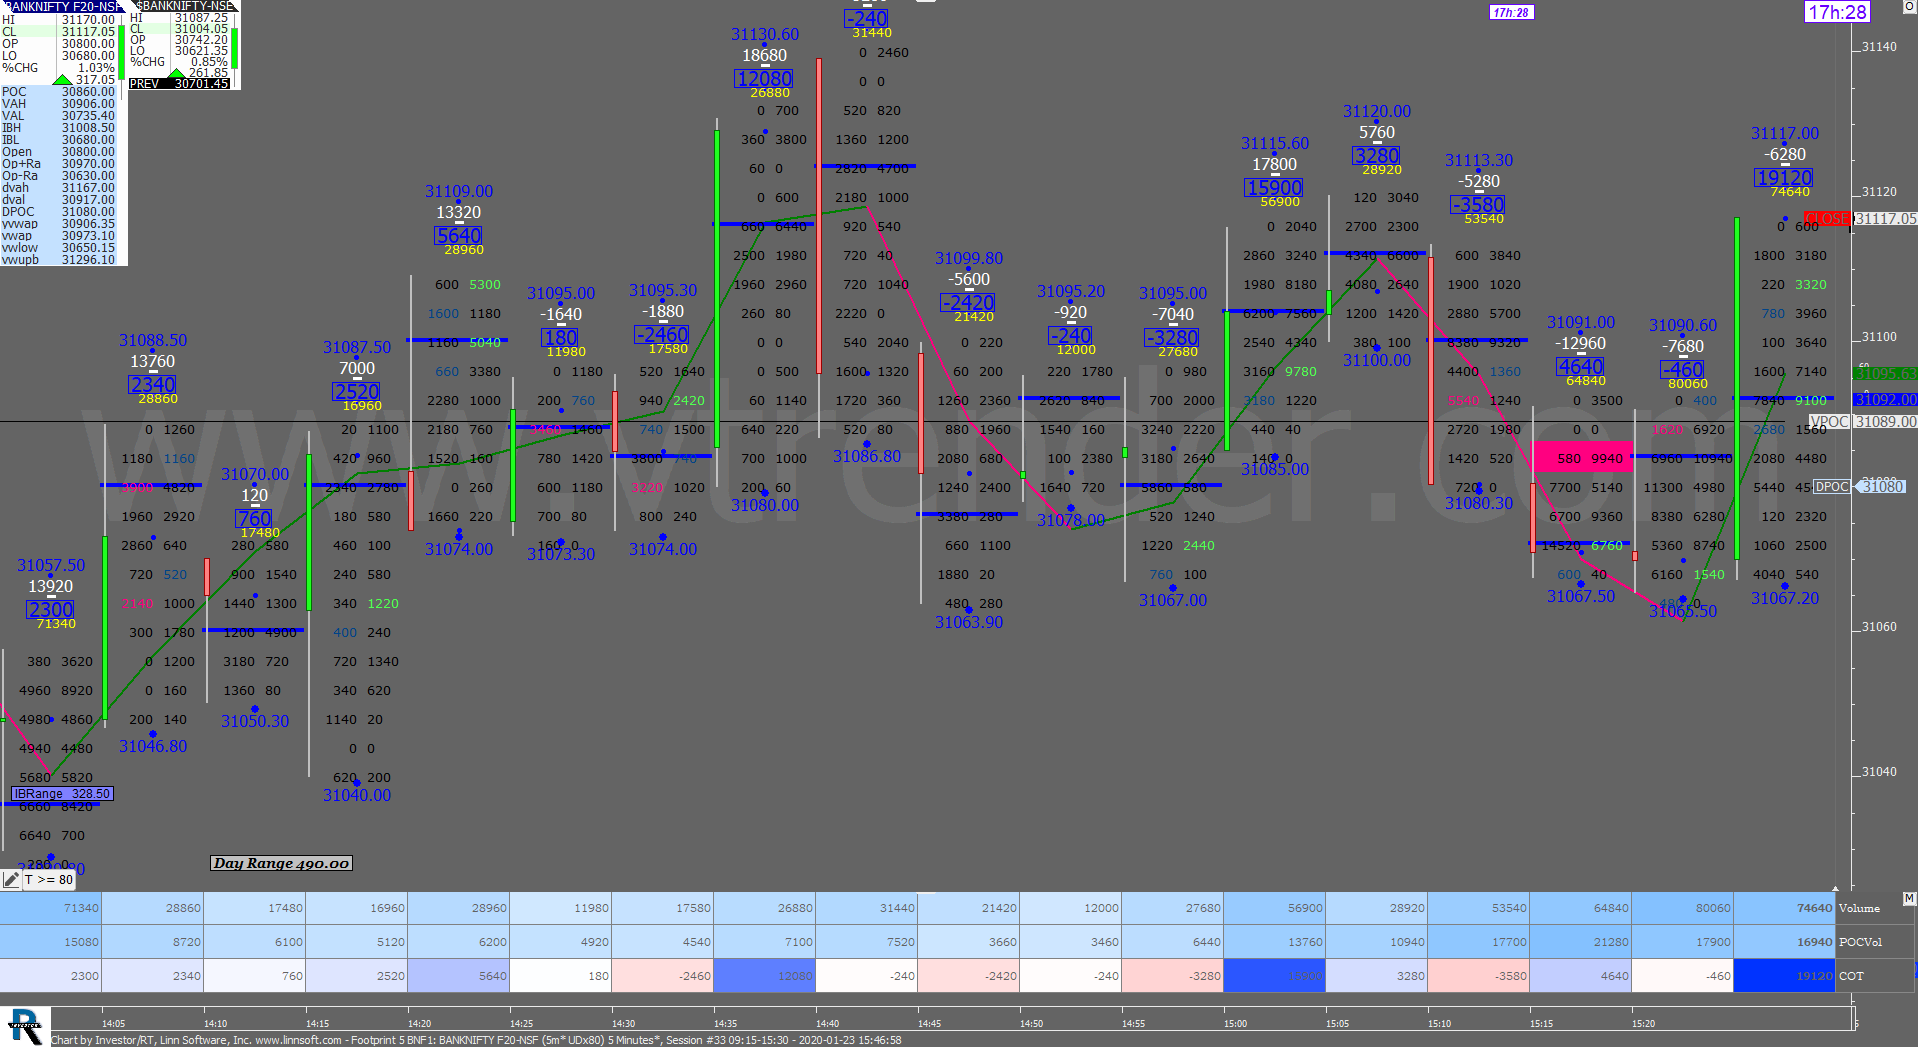 5 31 Order Flow Charts Dated 23Rd Jan 2020 (5 Mins) Banknifty Futures, Day Trading, Intraday Trading, Intraday Trading Strategies, Nifty Futures, Order Flow Analysis, Support And Resistance, Trading Strategies, Volume Profile Trading